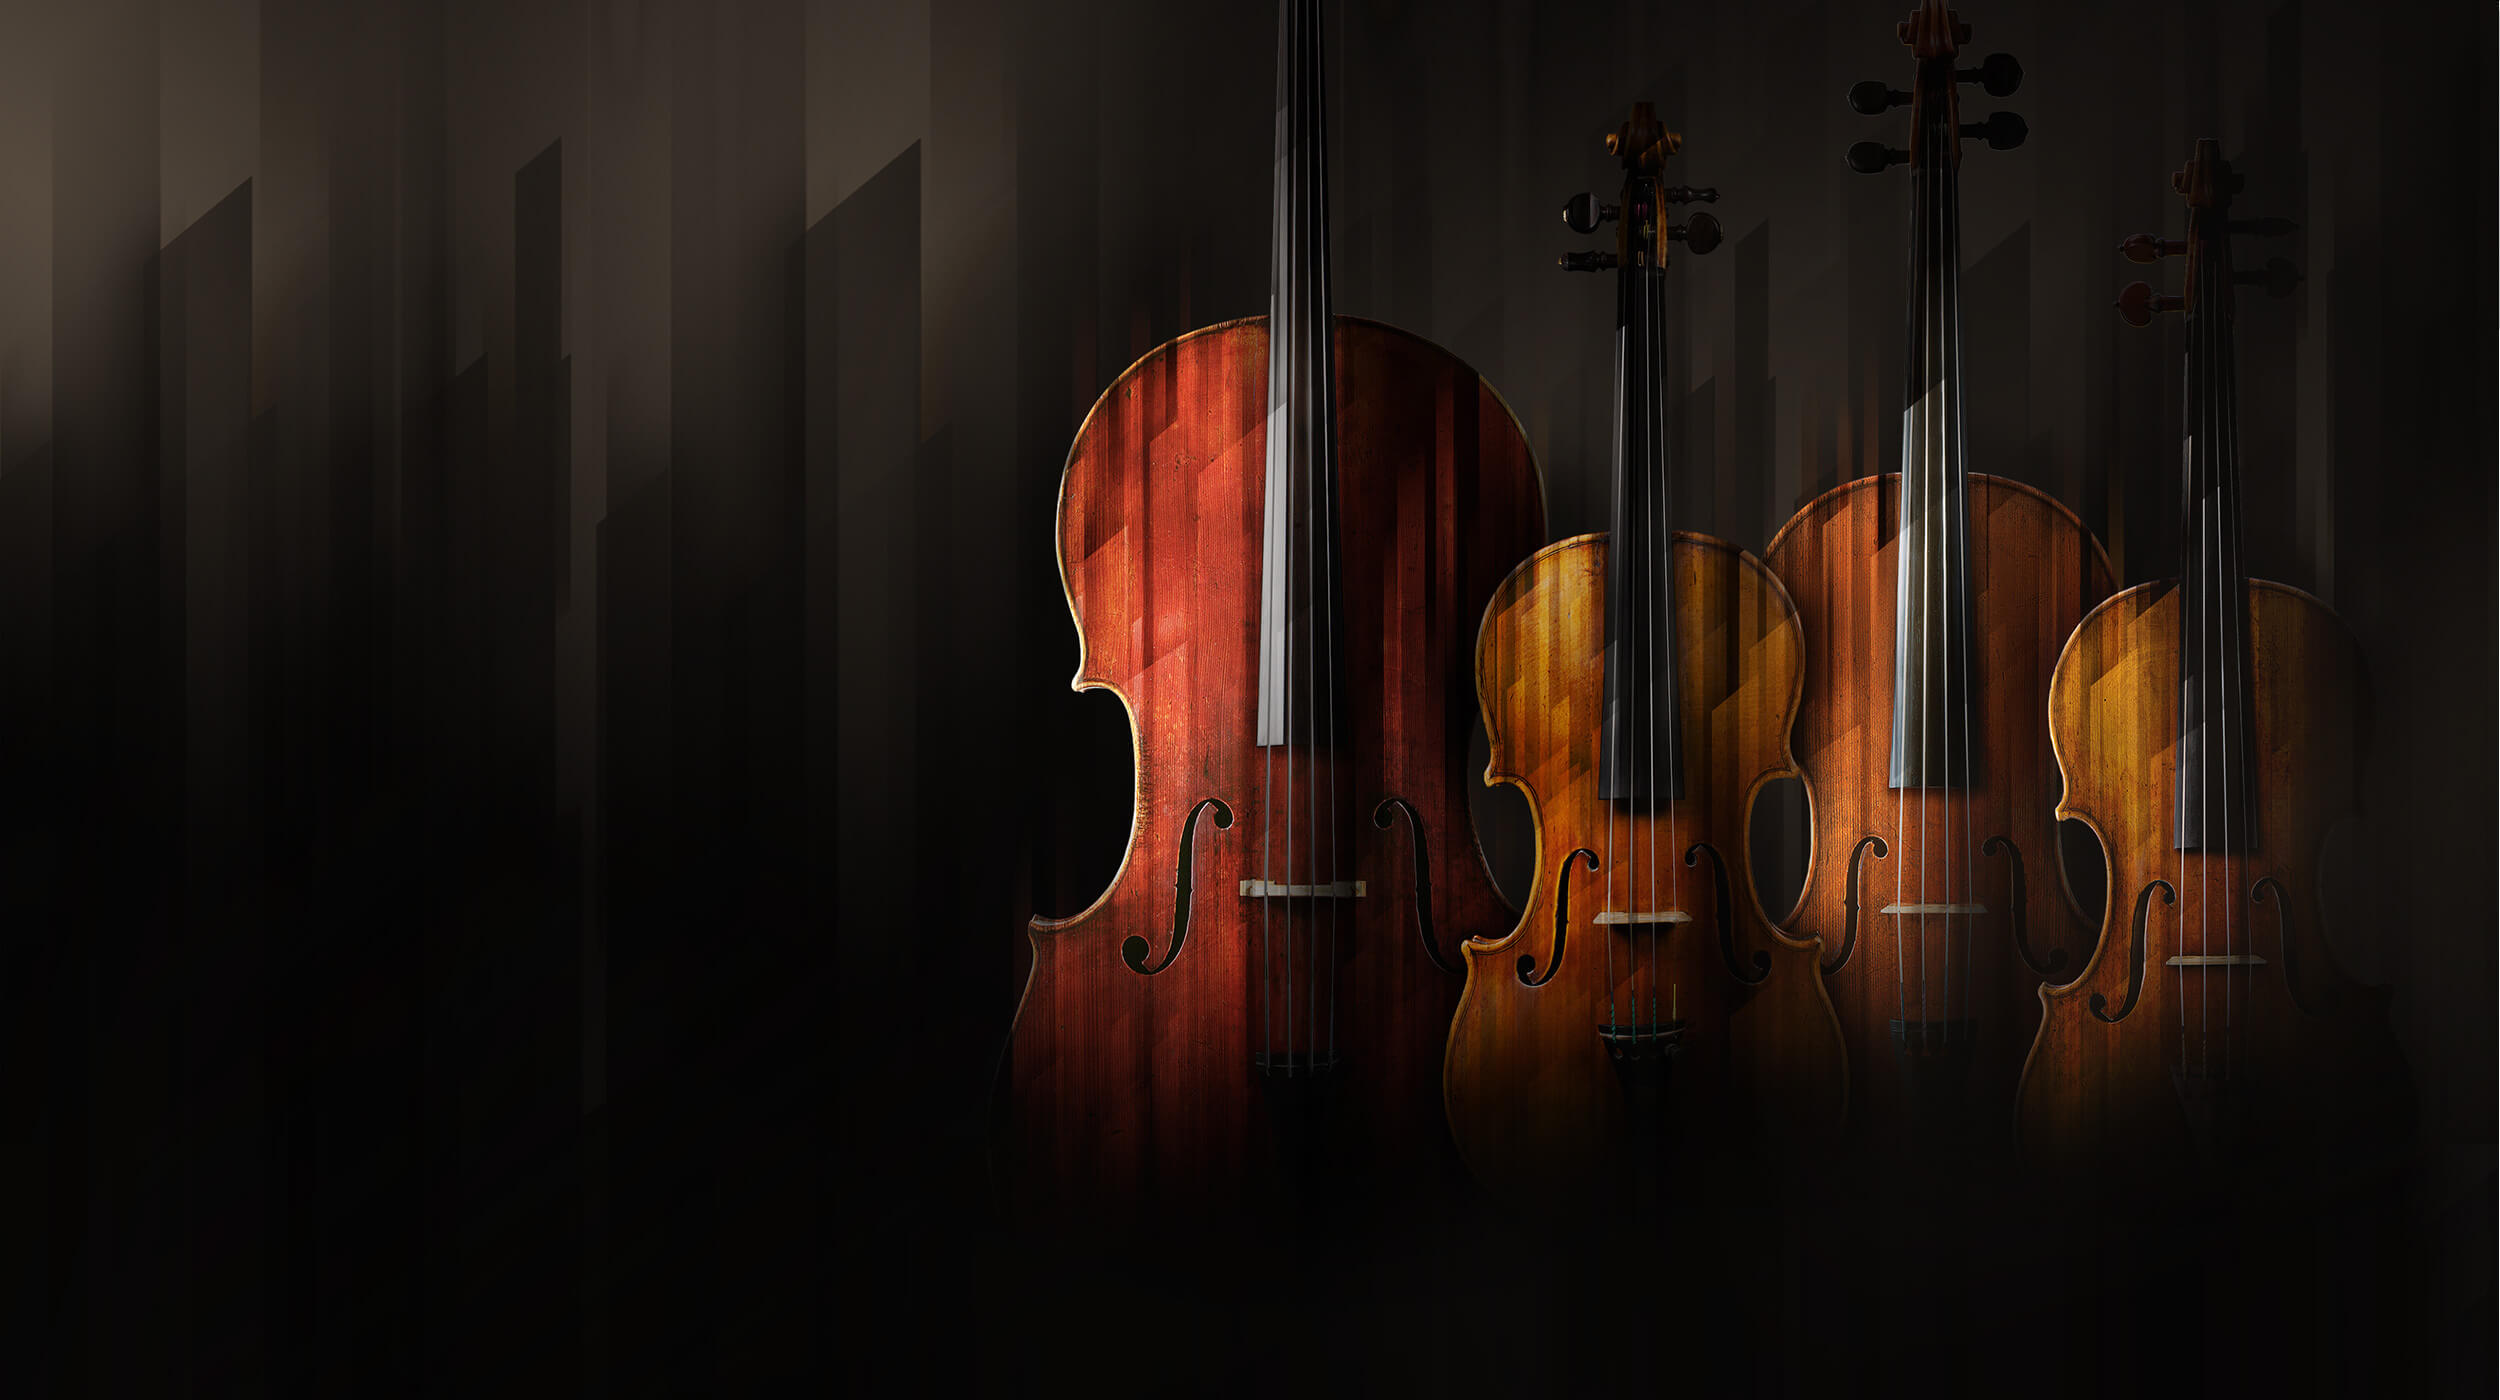 A series of cellos in a row